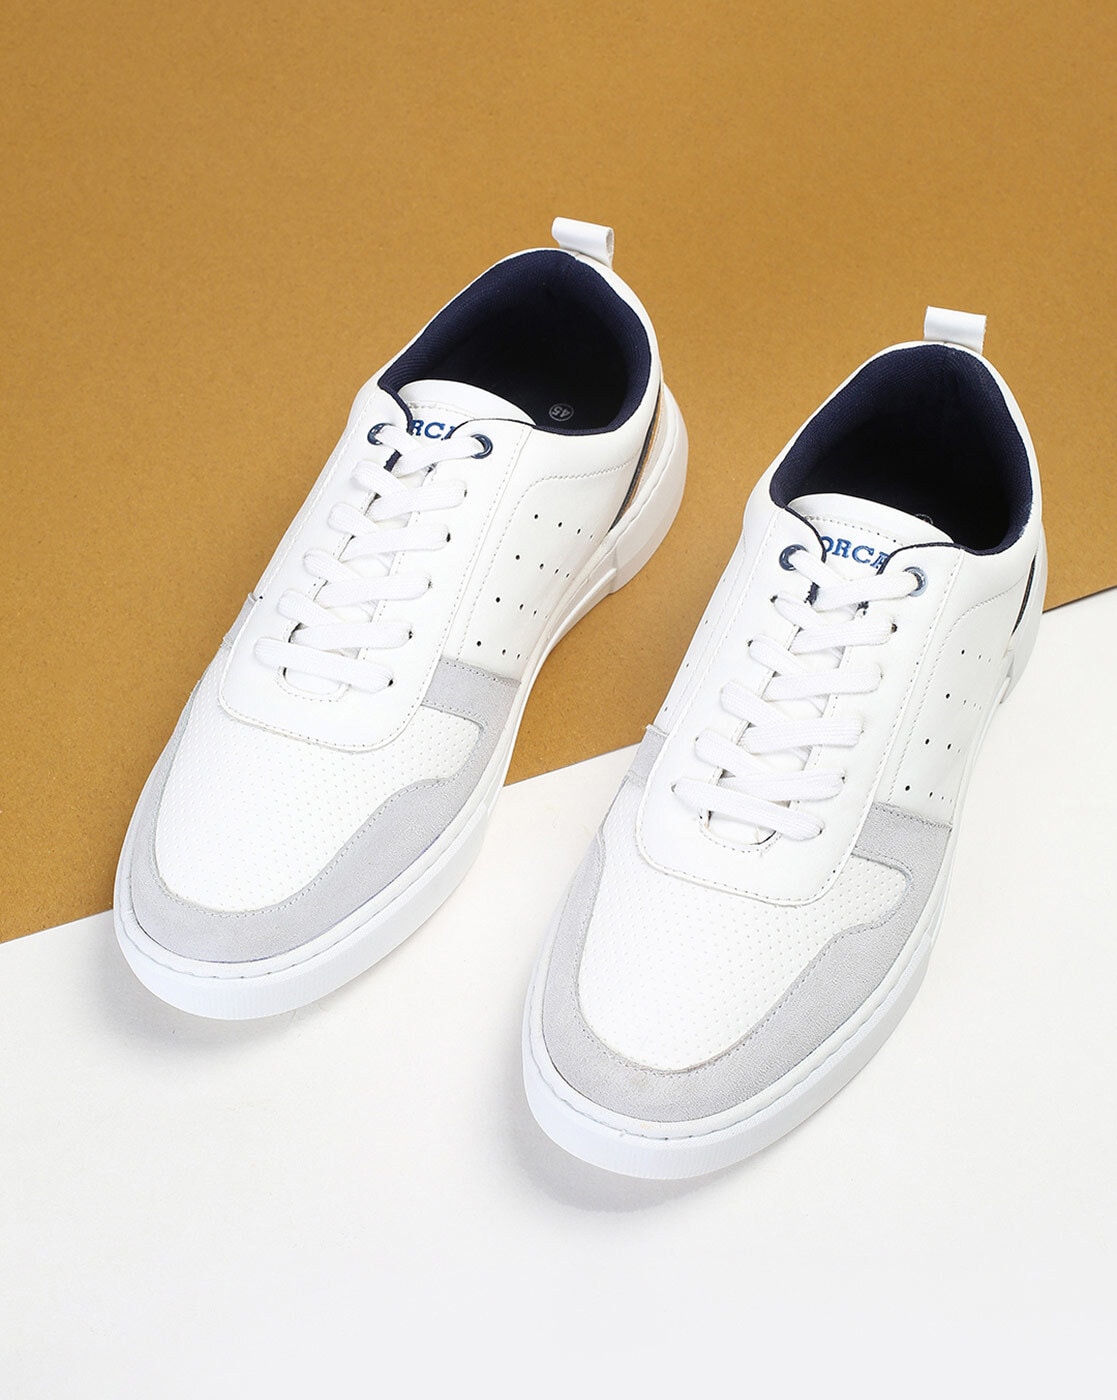 Share 143+ forca white sneakers super hot